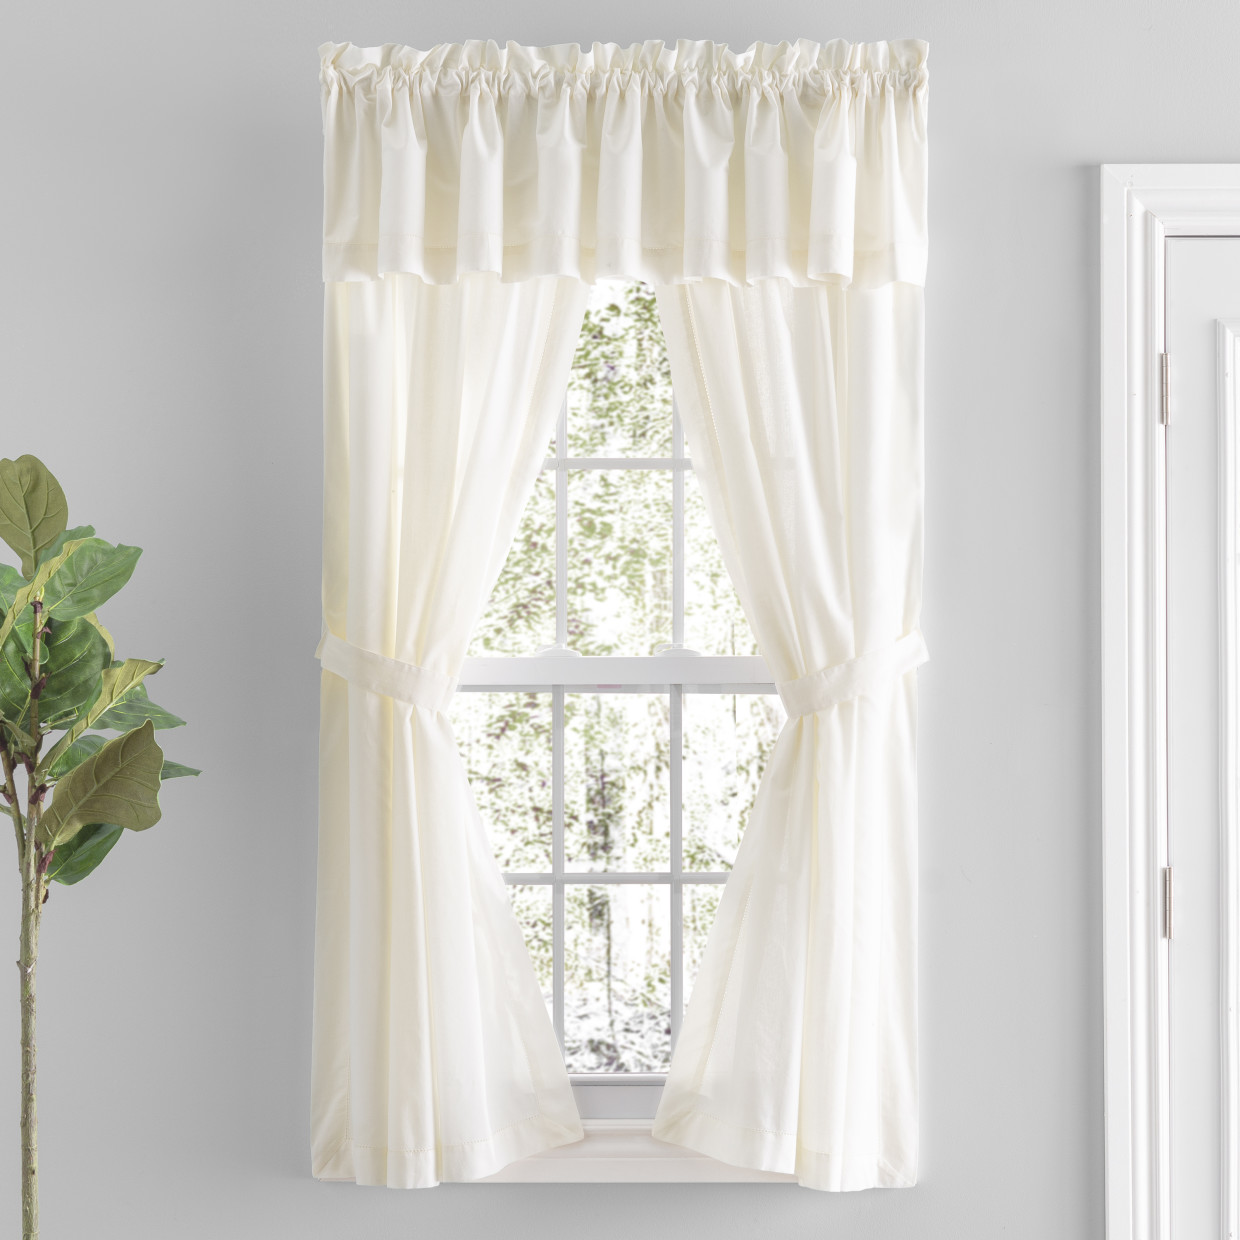 Ricardo Trading Simplicity Tailored Valance - Natural, 80"W X 13"L, 1.